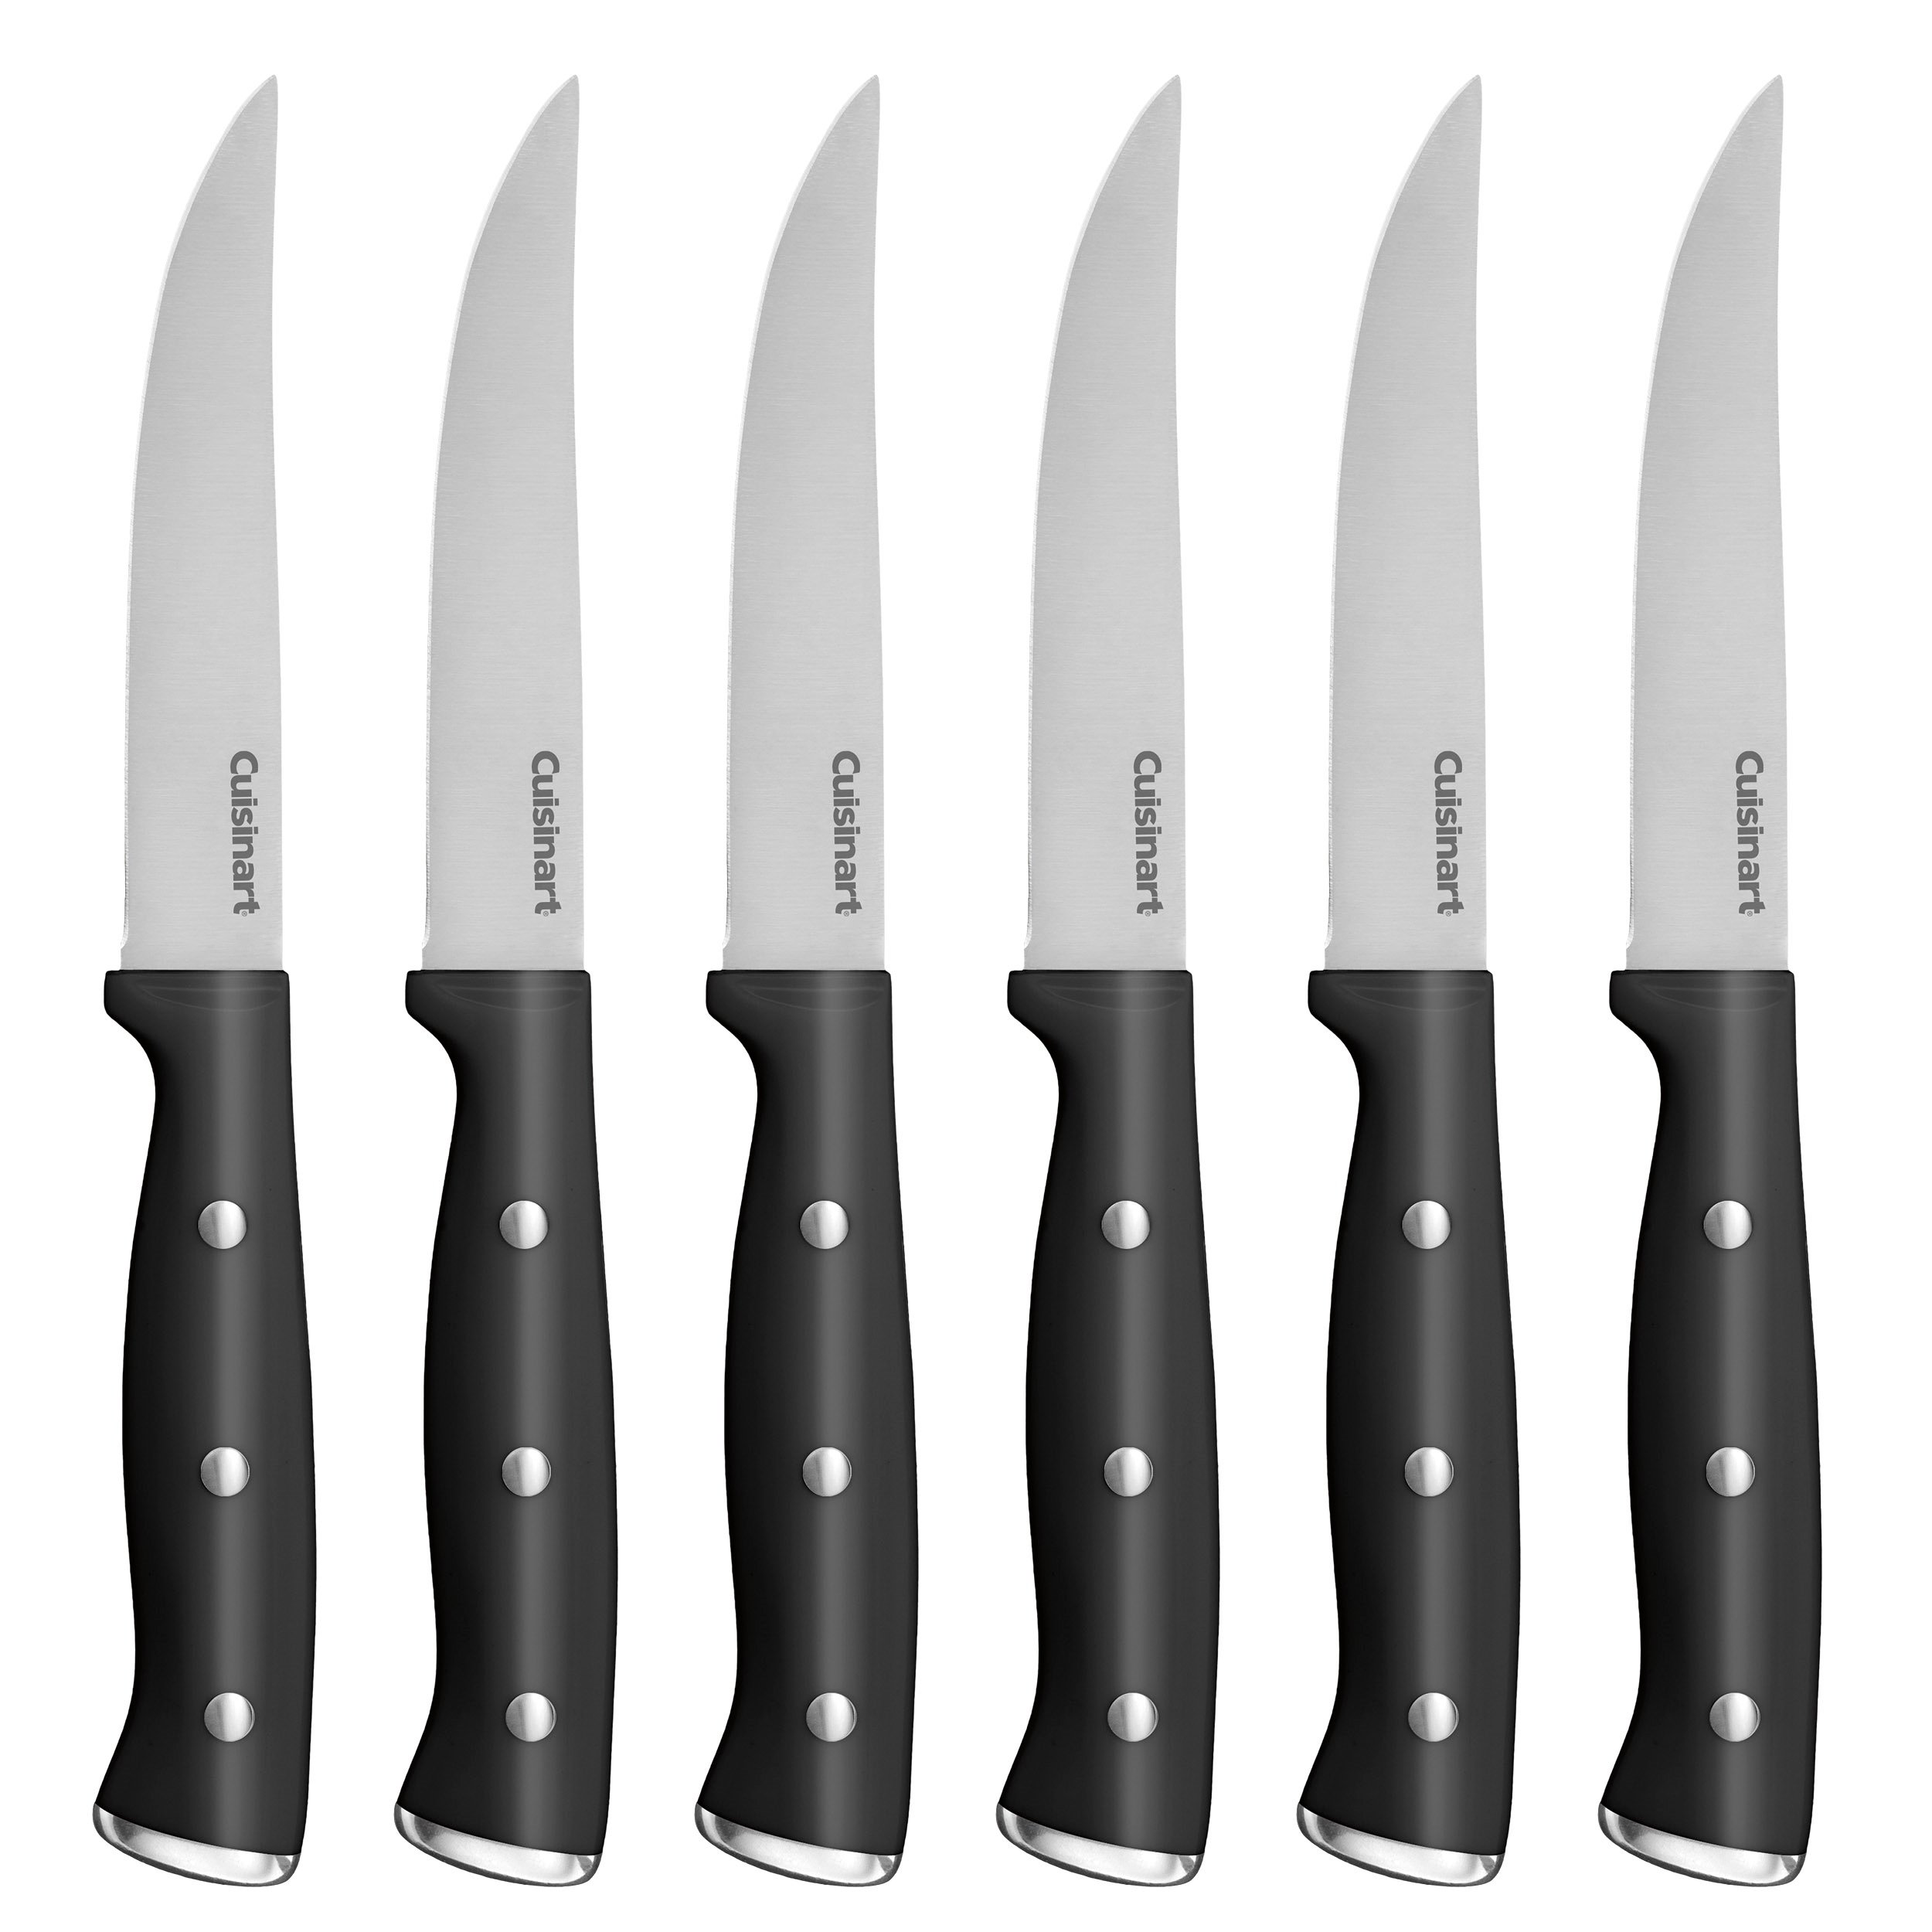  Cuisinart Cordless Electric Knife, Black: Home & Kitchen